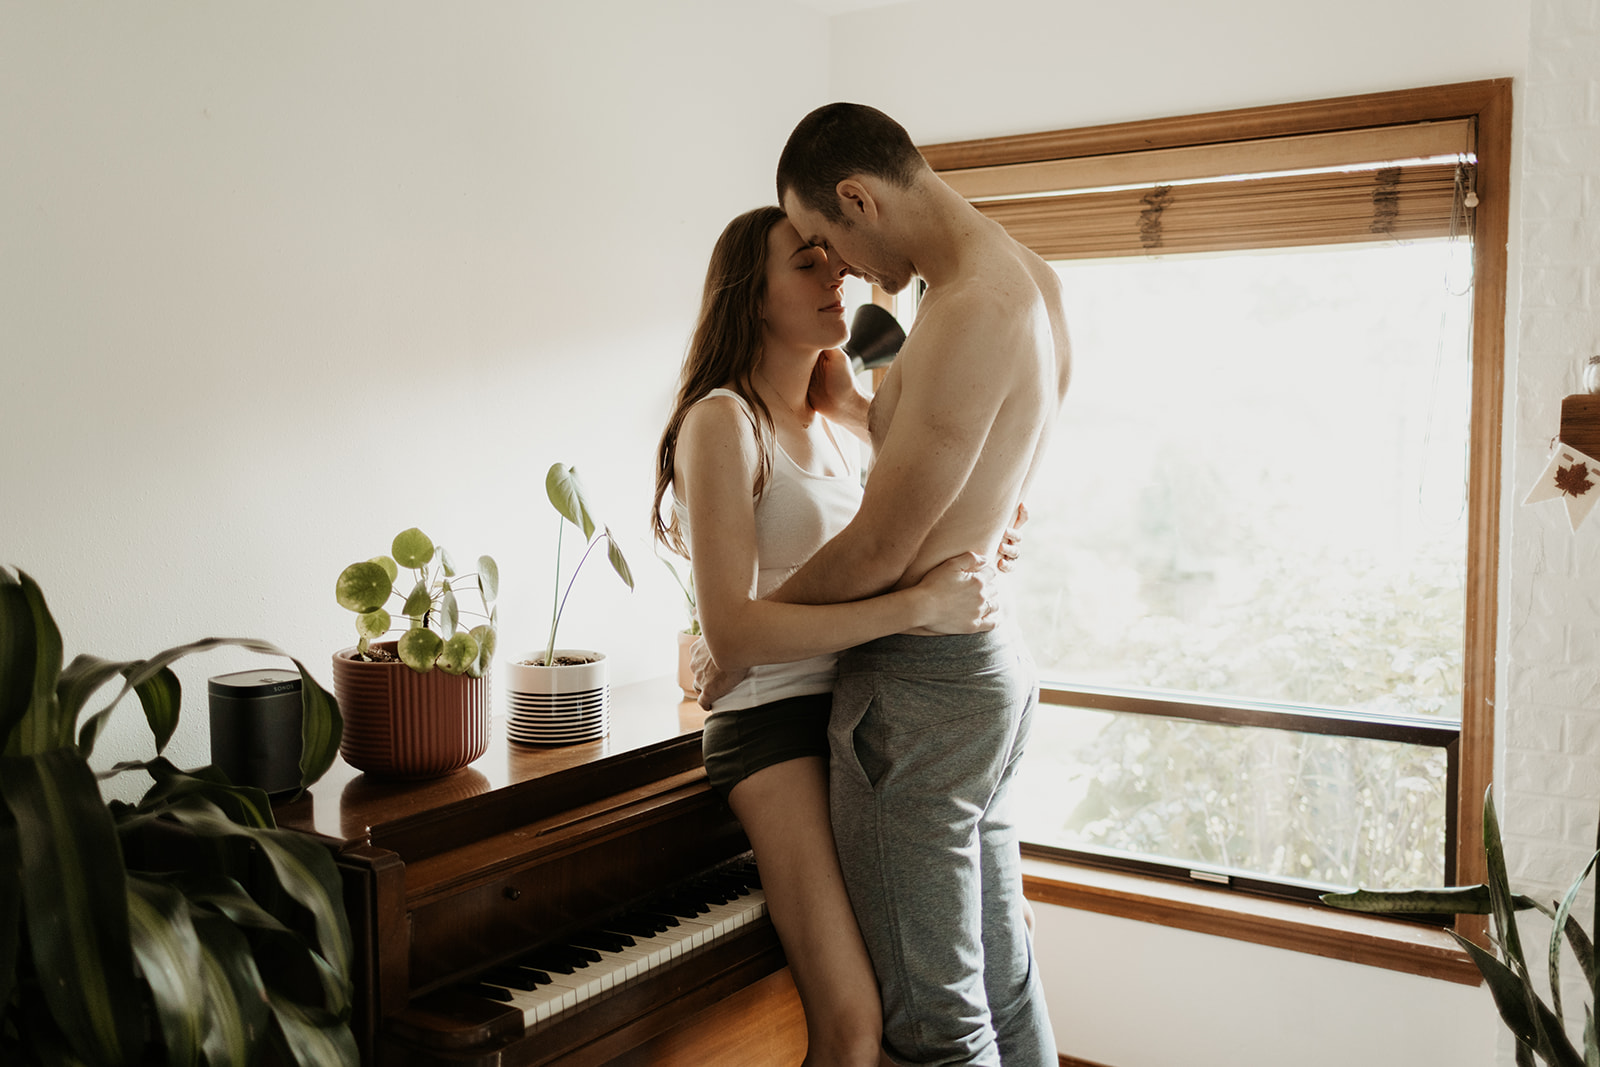 shirtless man and woman hold each other while leaning against piano